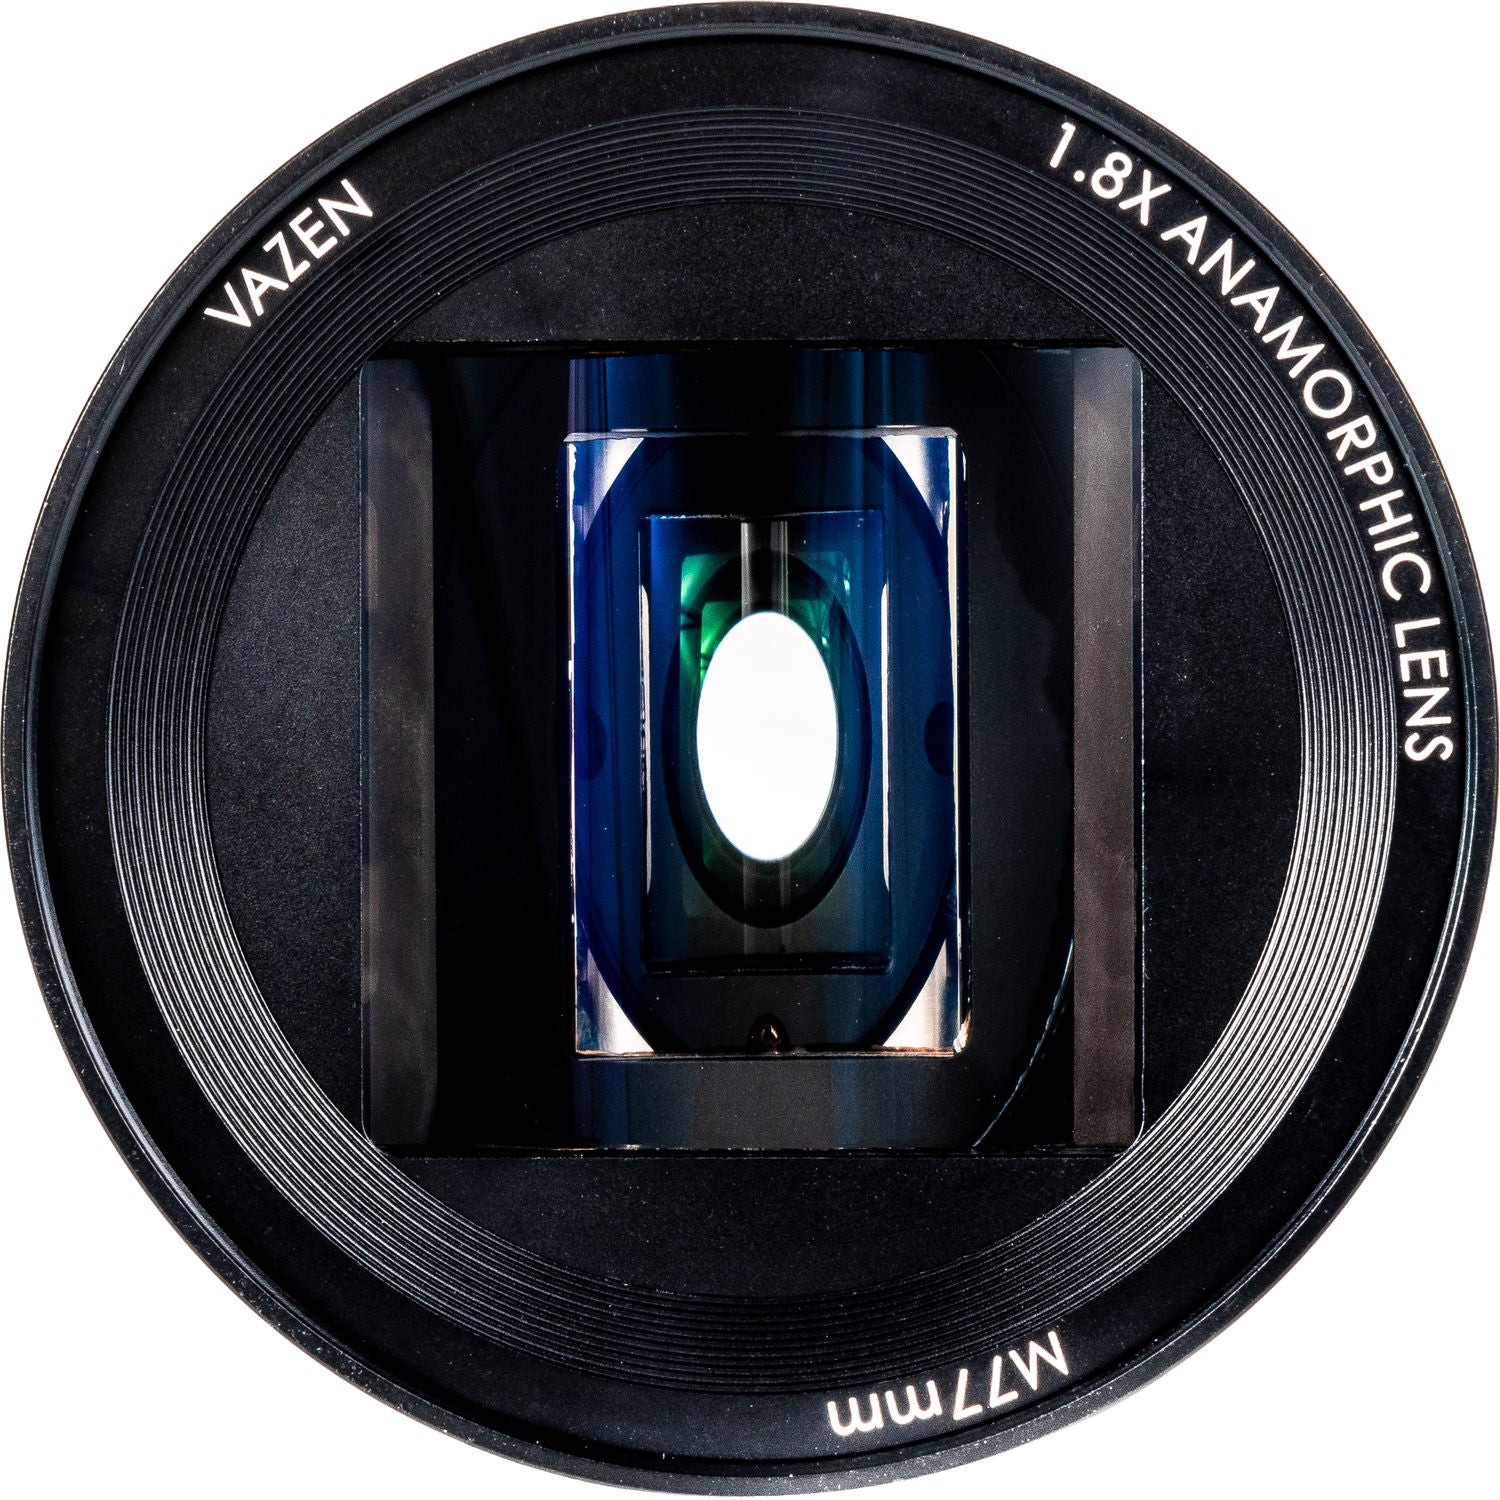 Vazen 28mm T/2.2 1.8X Anamorphic Lens for MFT Camera in a Front Close-Up View